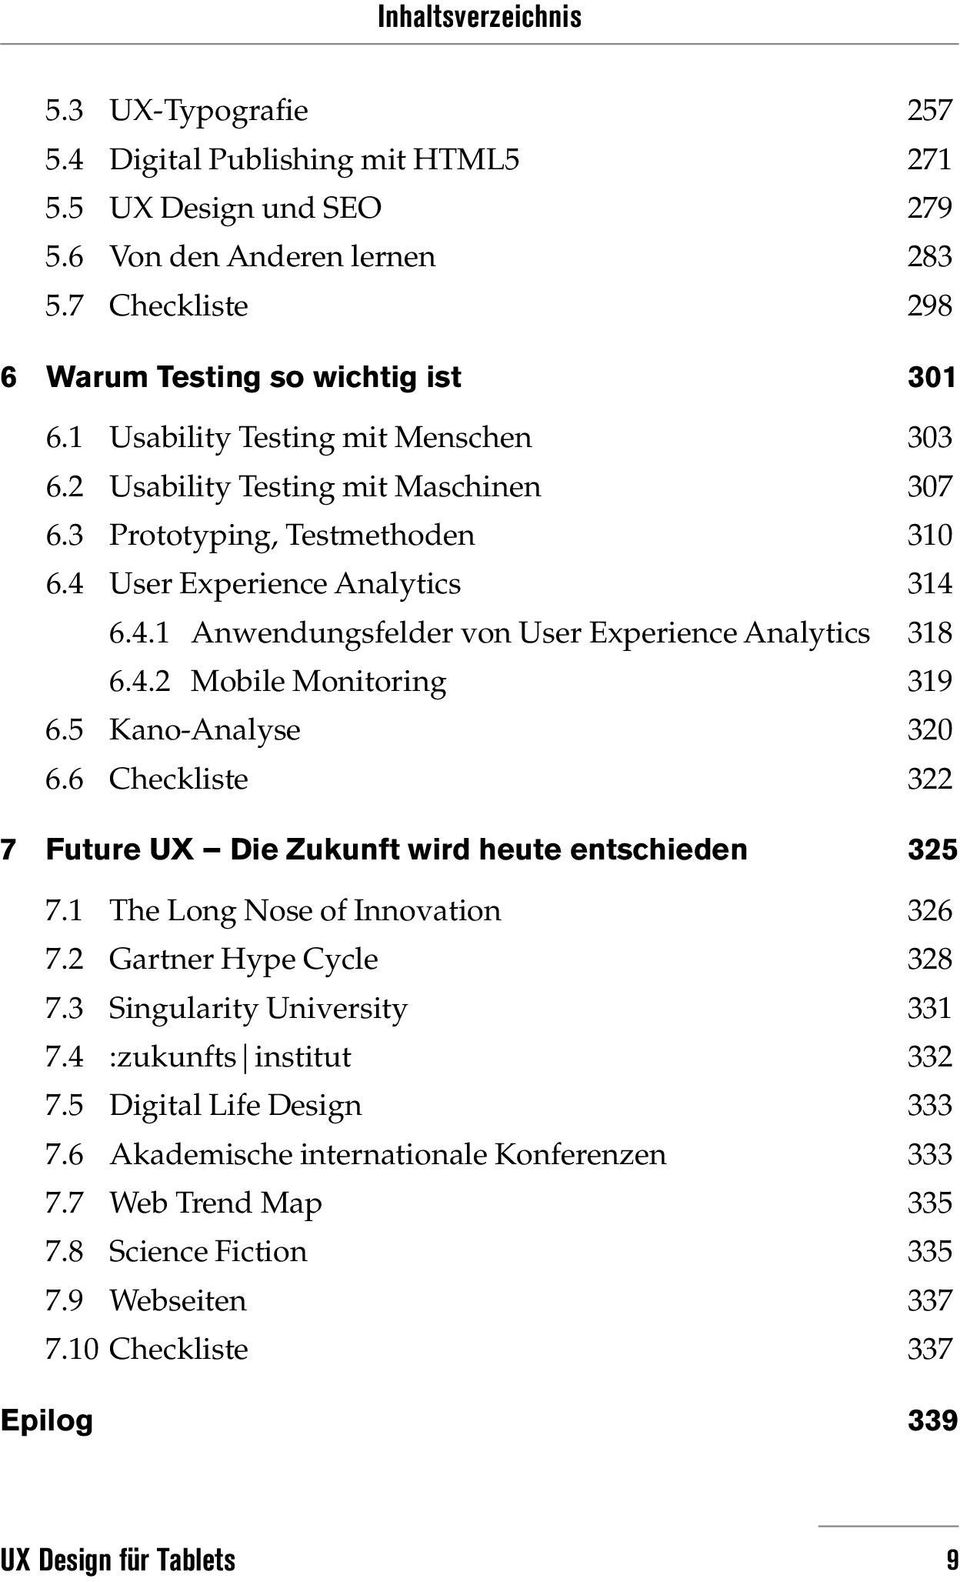 4.2 Mobile Monitoring 319 6.5 Kano-Analyse 320 6.6 Checkliste 322 7 Future UX Die Zukunft wird heute entschieden 325 7.1 The Long Nose of Innovation 326 7.2 Gartner Hype Cycle 328 7.